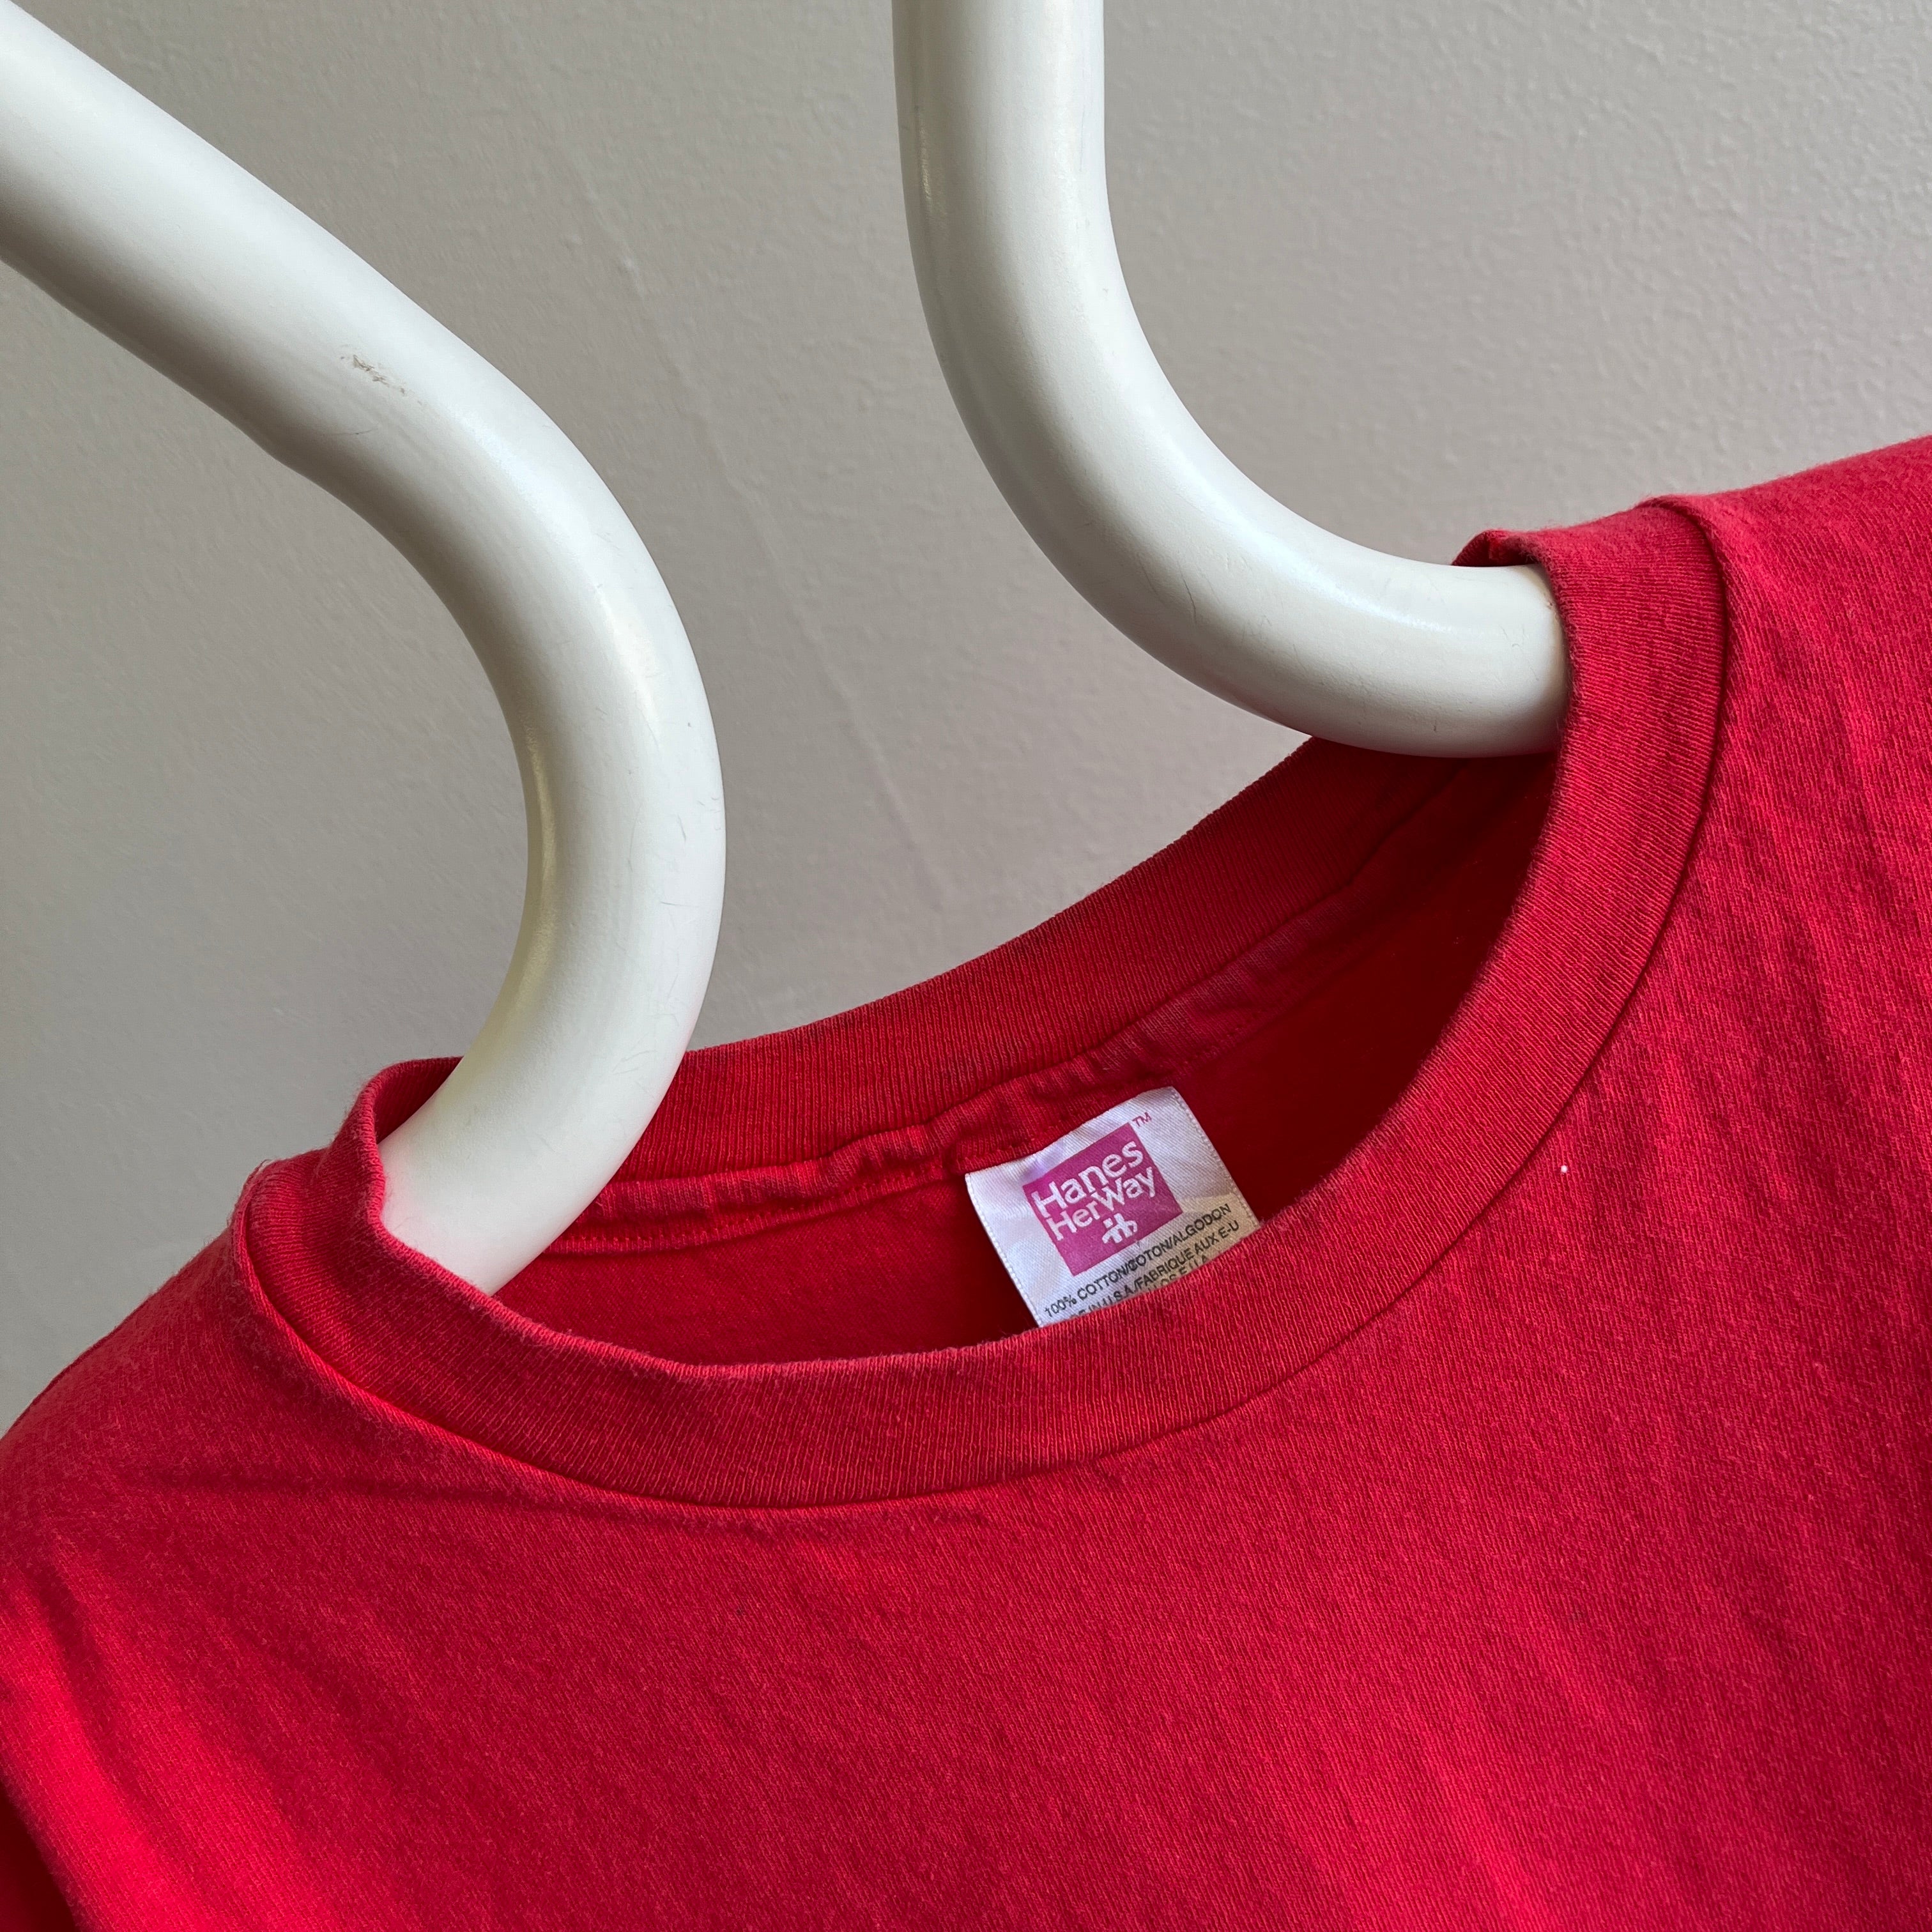 Hanes Her Way T-Shirt - Product Images